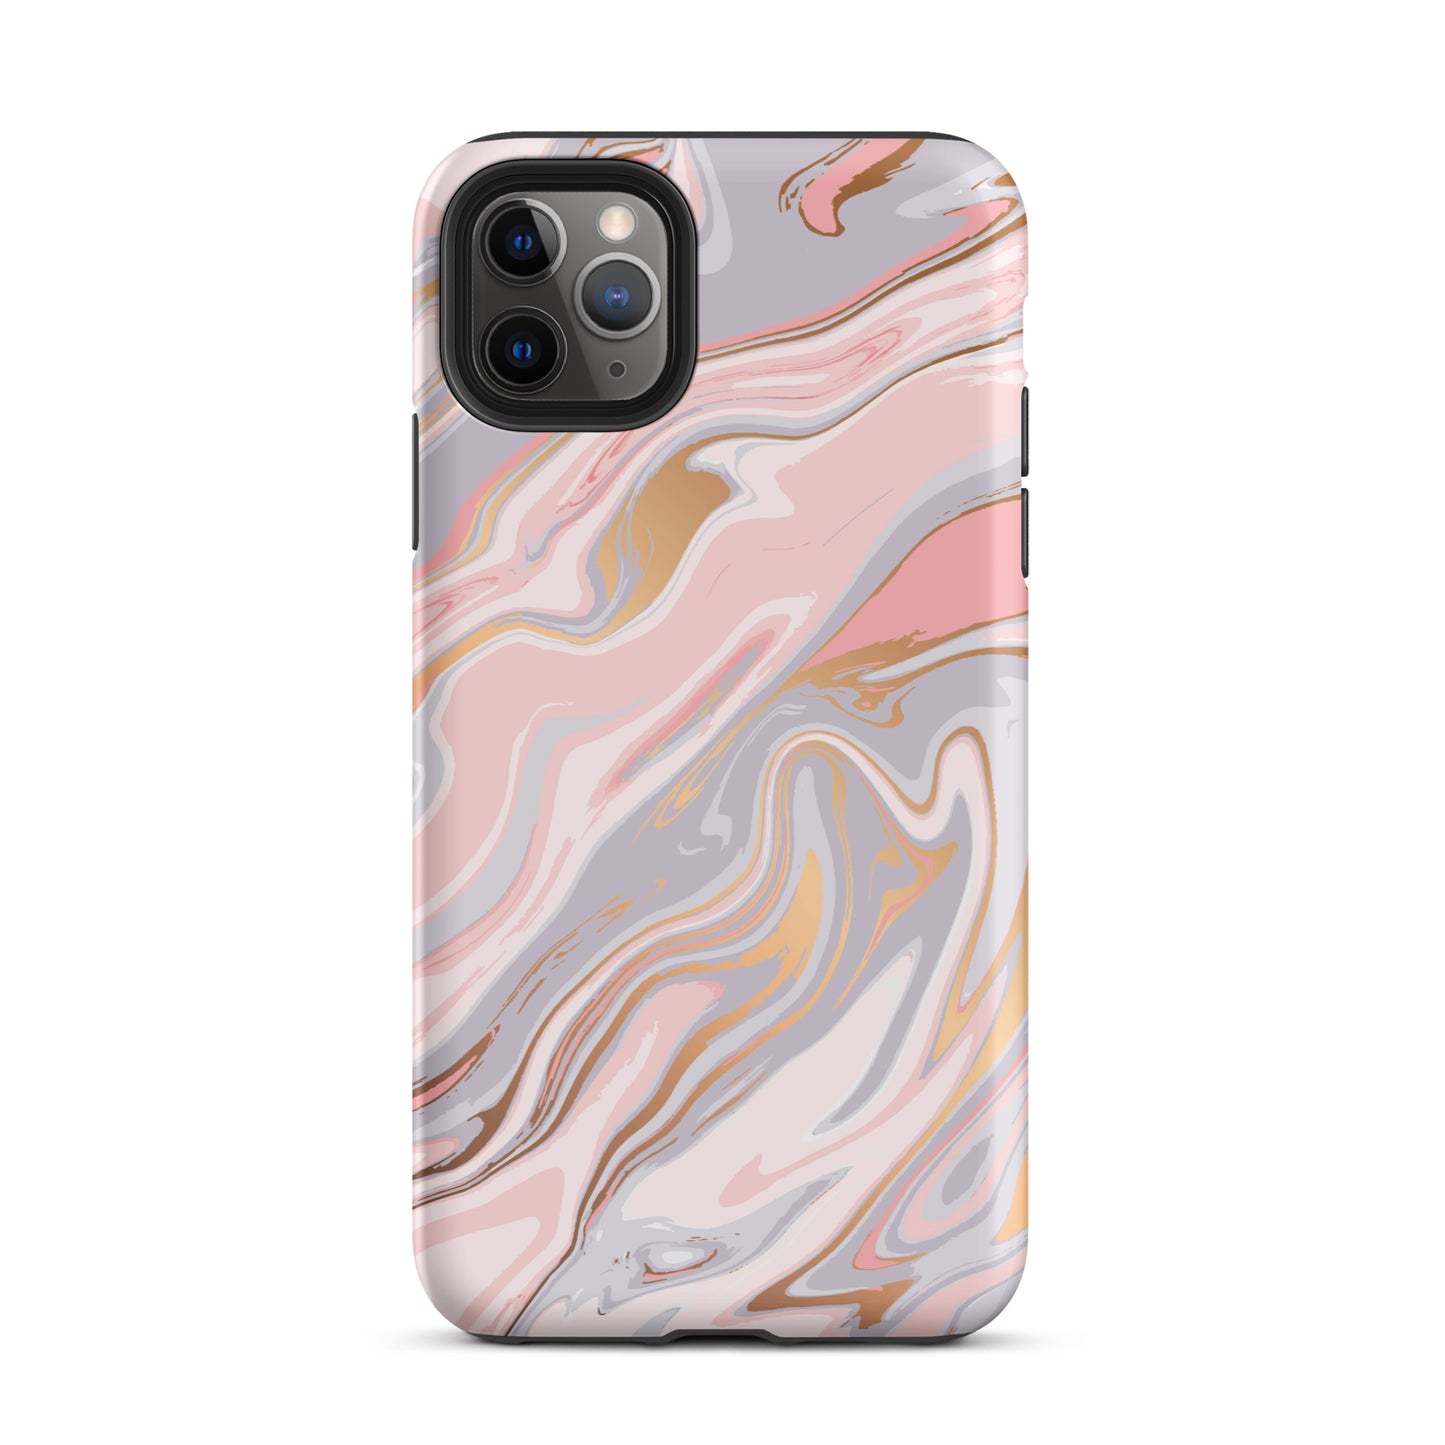 Rose Marble iPhone Case iPhone 11 Pro Max Matte